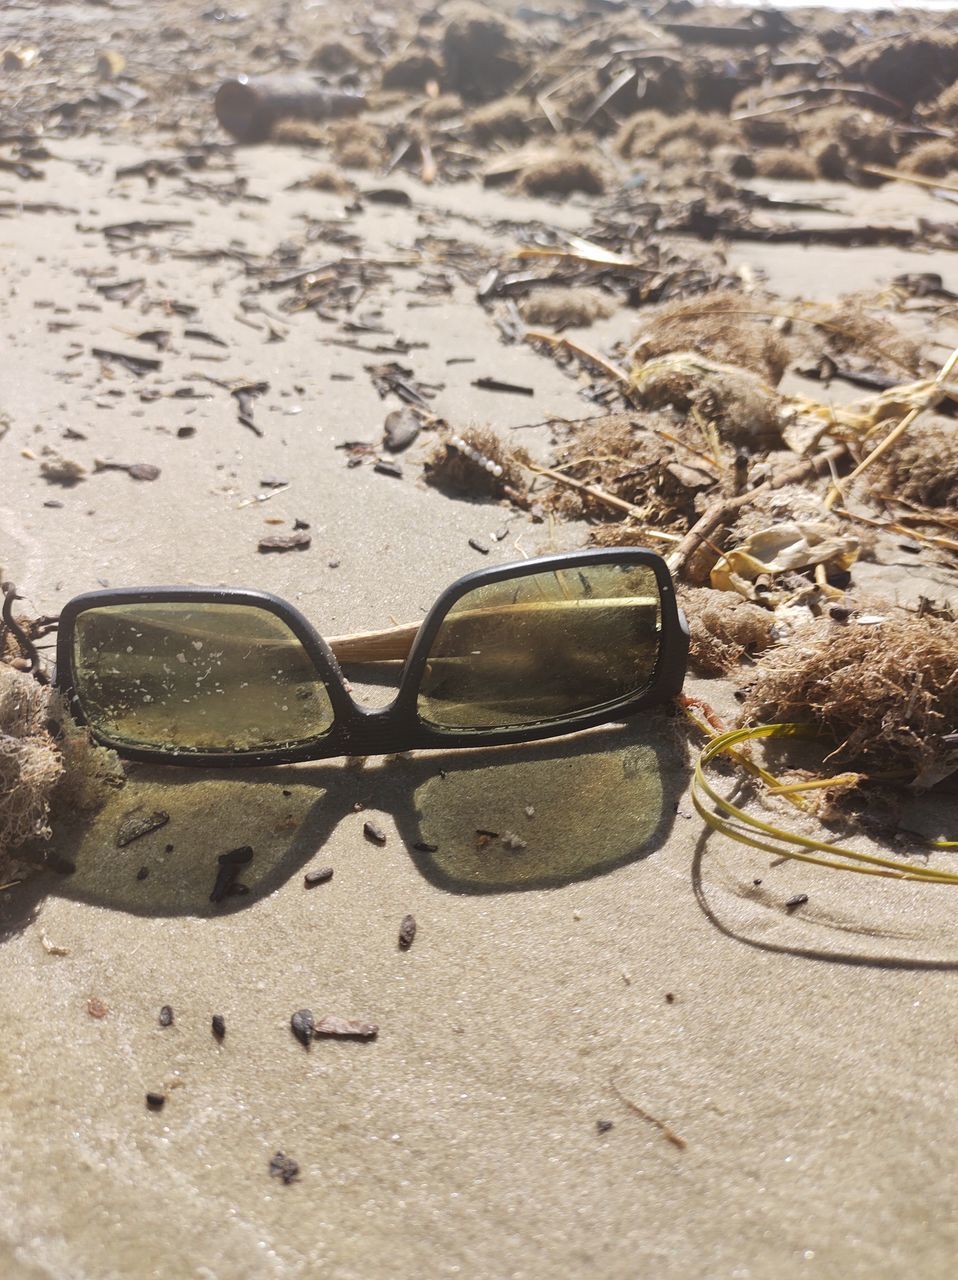 SURFACE LEVEL OF SUNGLASSES ON BEACH